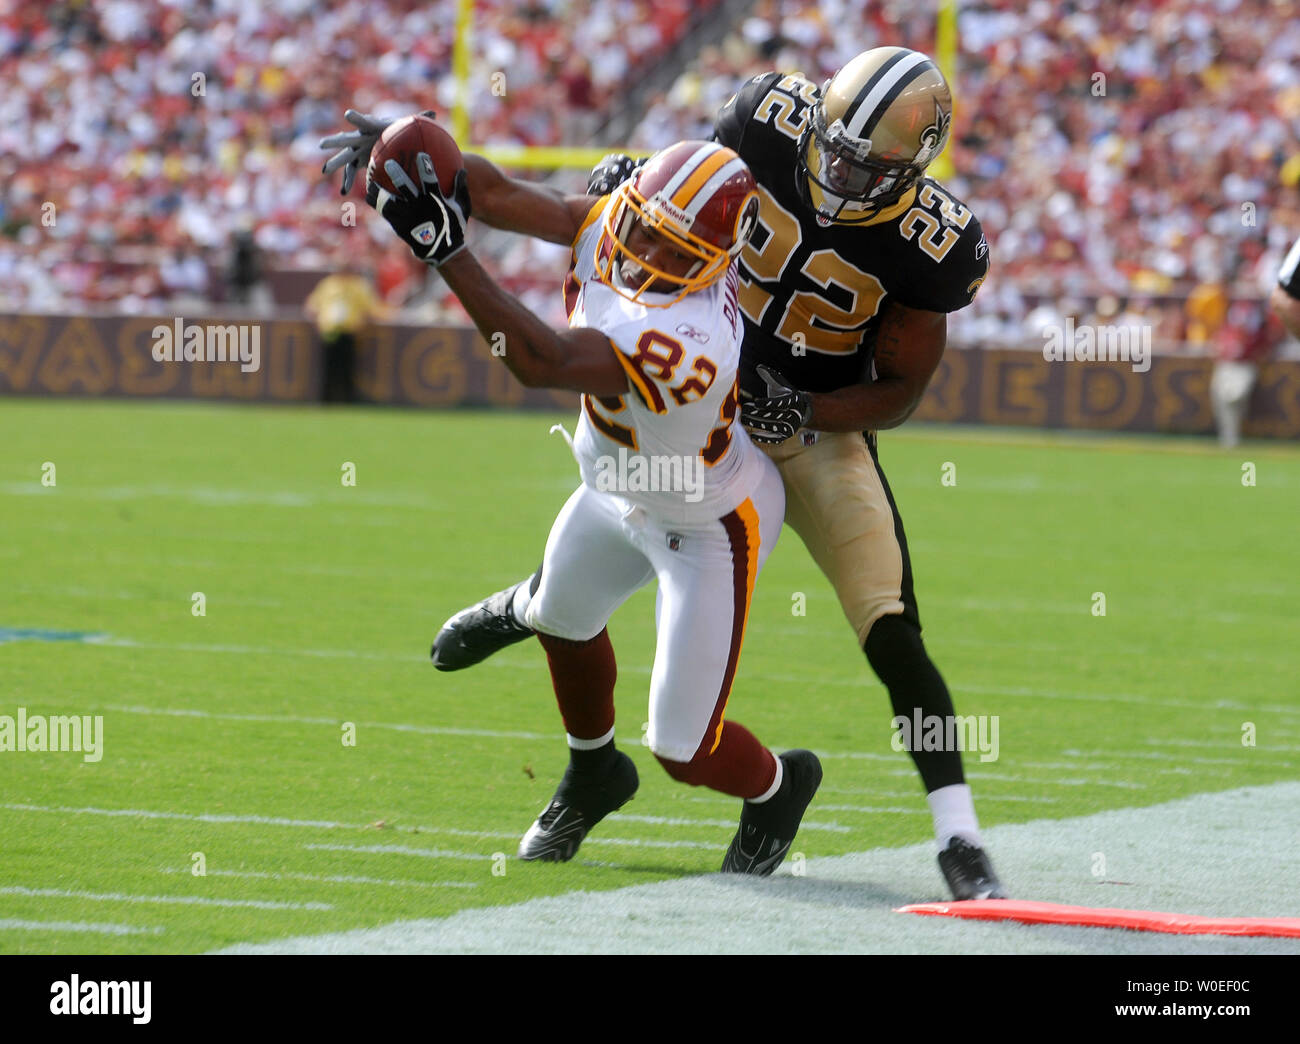 Washington Redskins' Antwaan Randle El brings in a first down reception against New Orleans Saints Tracy Porter during the fourth quarter at FedEx Field in Landover, Maryland on September 14, 2008. The Redskins defeated the Saints 29-24. (UPI Photo/Kevin Dietsch) Stock Photo